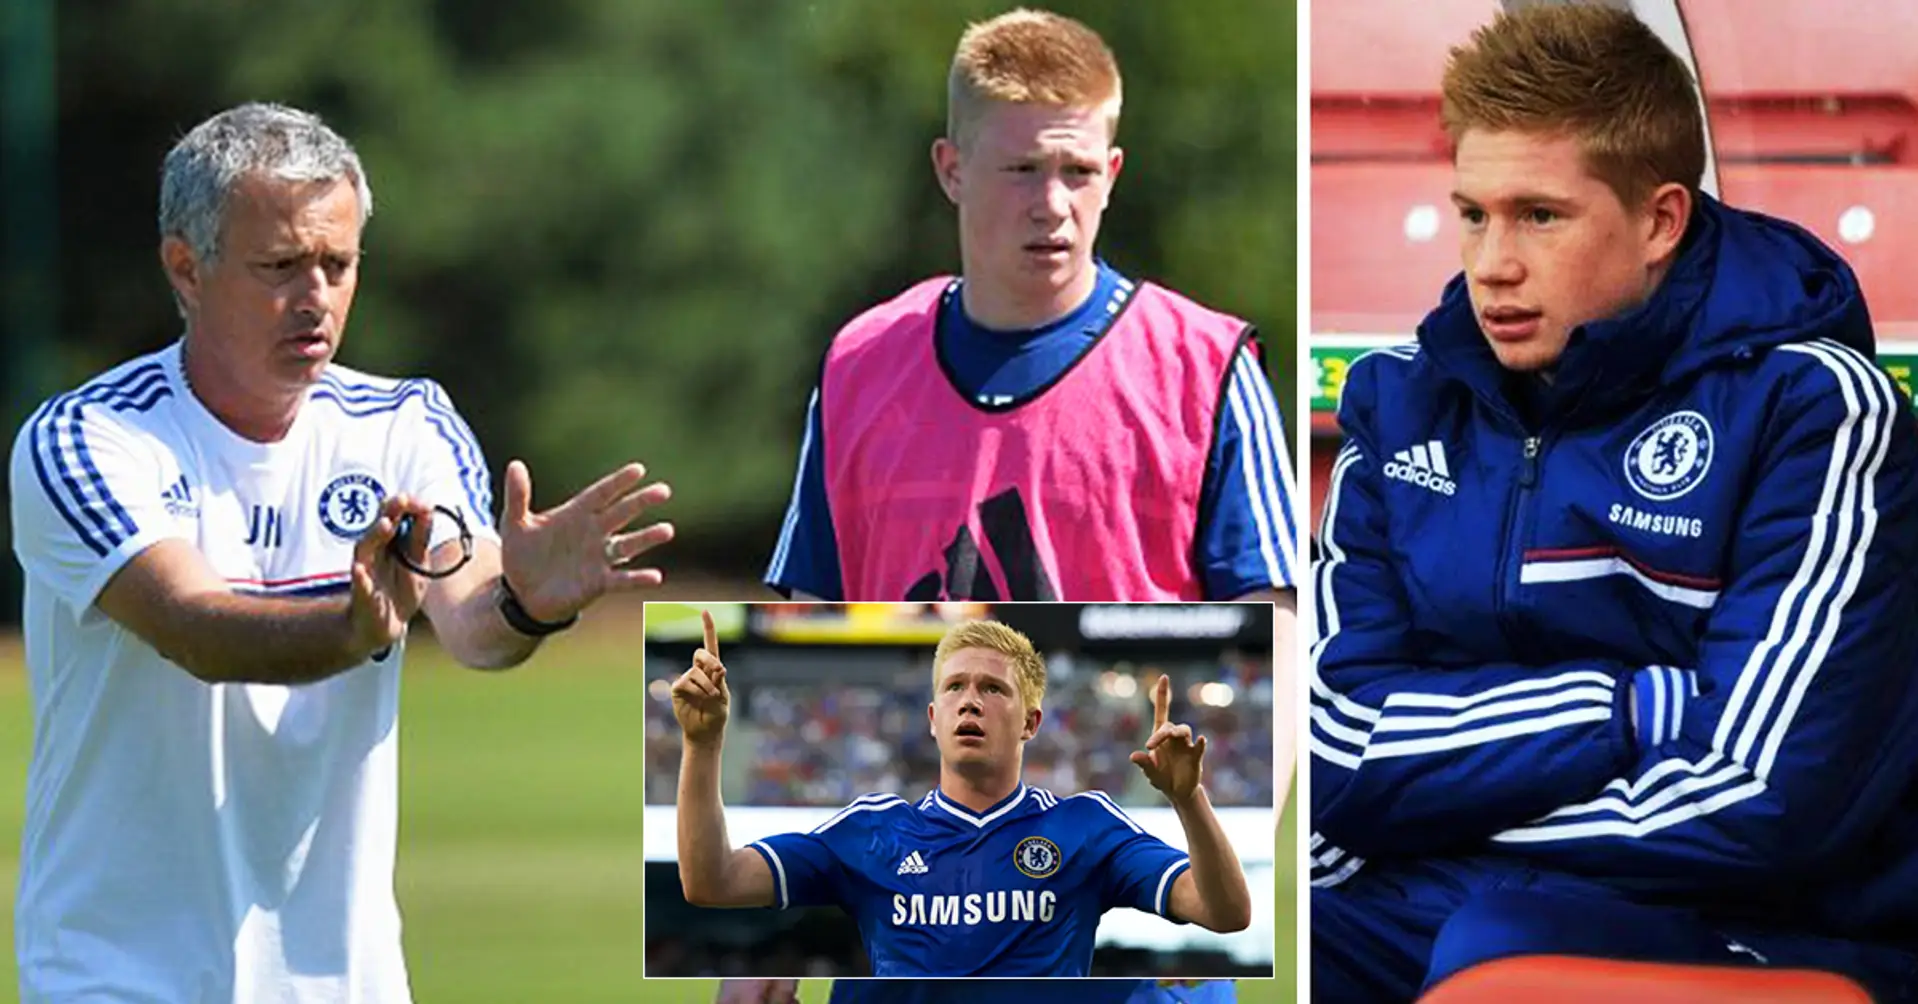 'He had papers, it was so strange'. De Bruyne reveals what Jose Mourinho told him before Kevin left Chelsea